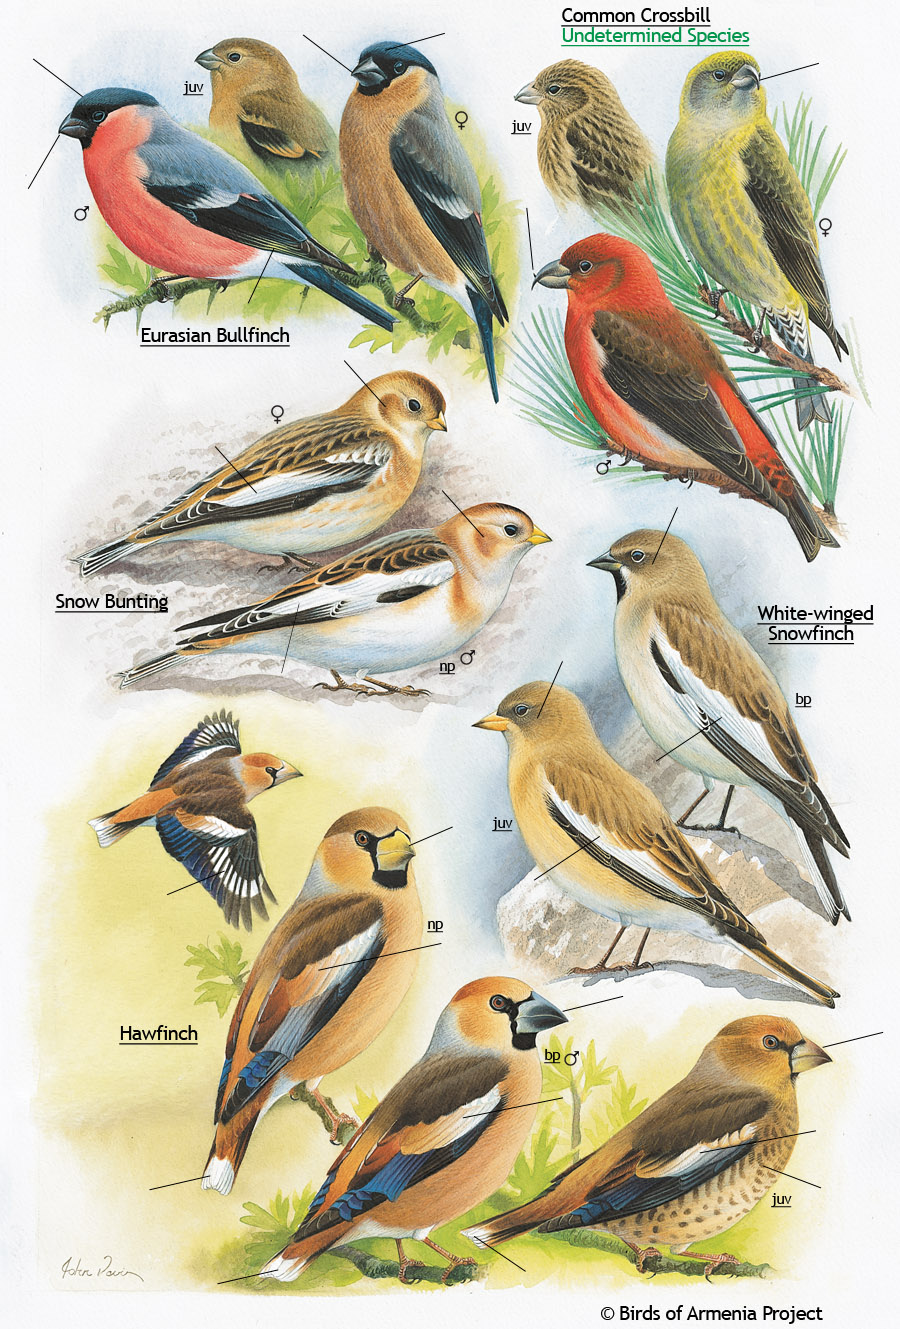 Crossbills, Bullfinches, Buntings, Hawfinches and Snowfinches